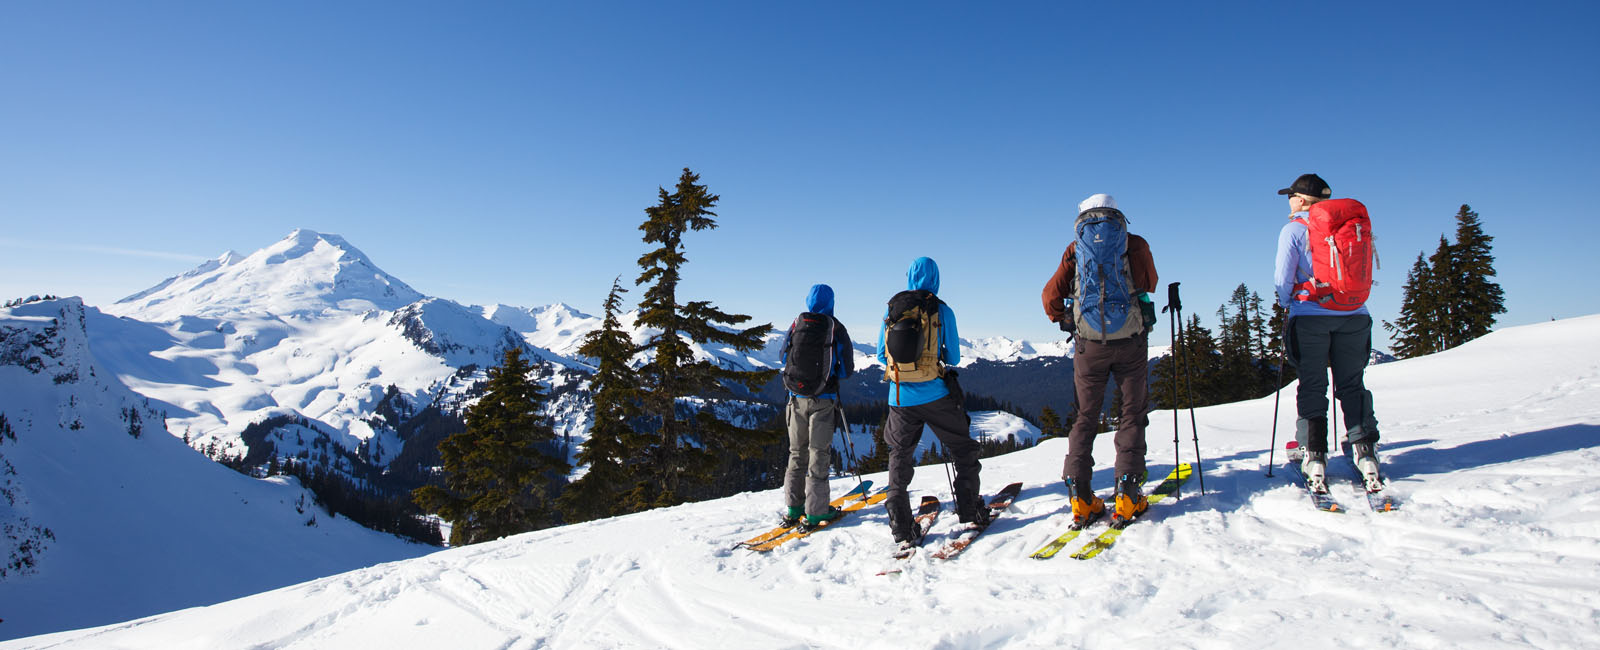 4 skiers standing in snow